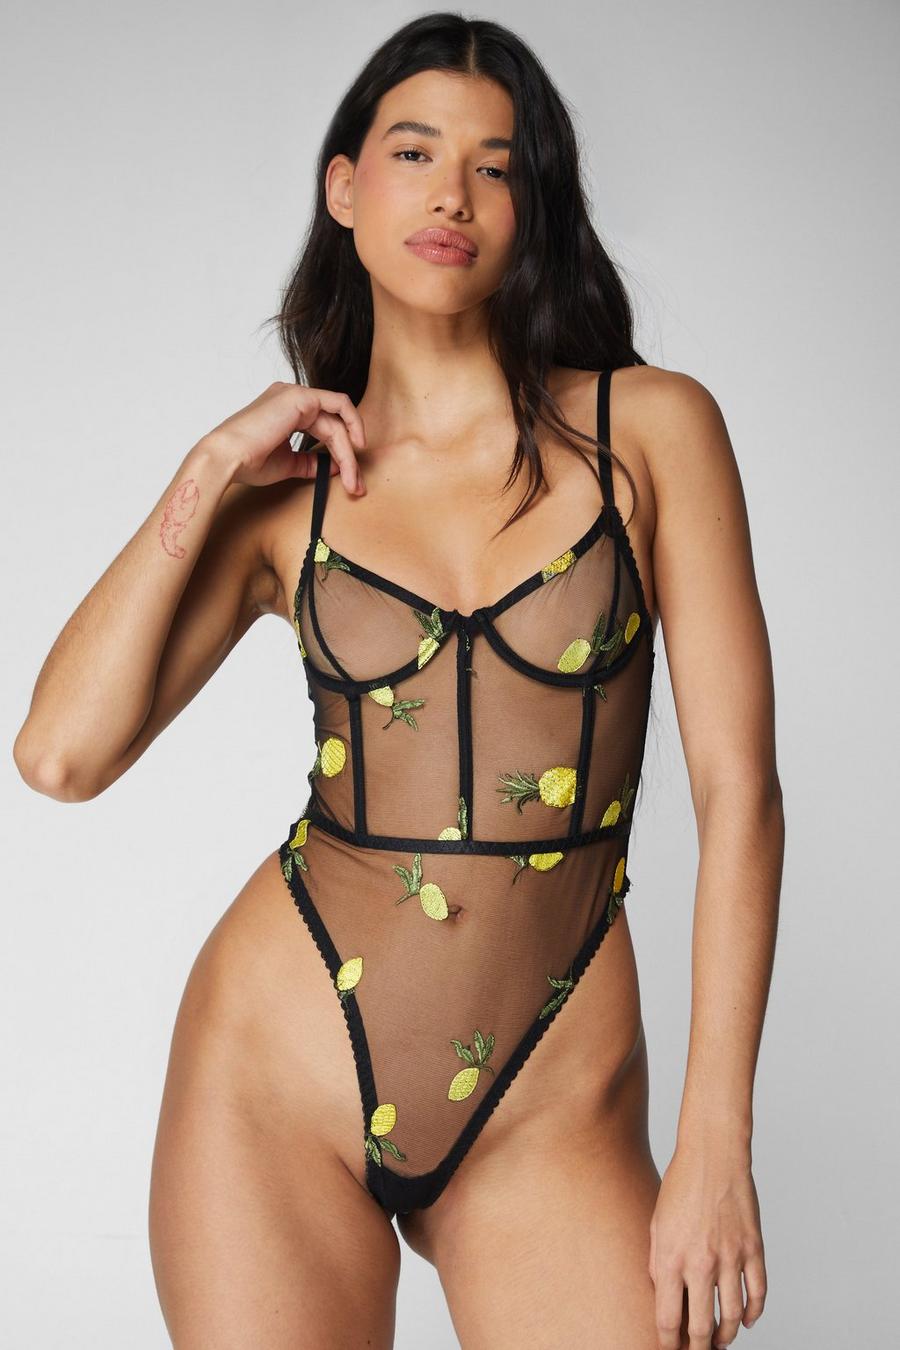 Lemon and Pineapple Embroidered Underwire Lingerie Bodysuit